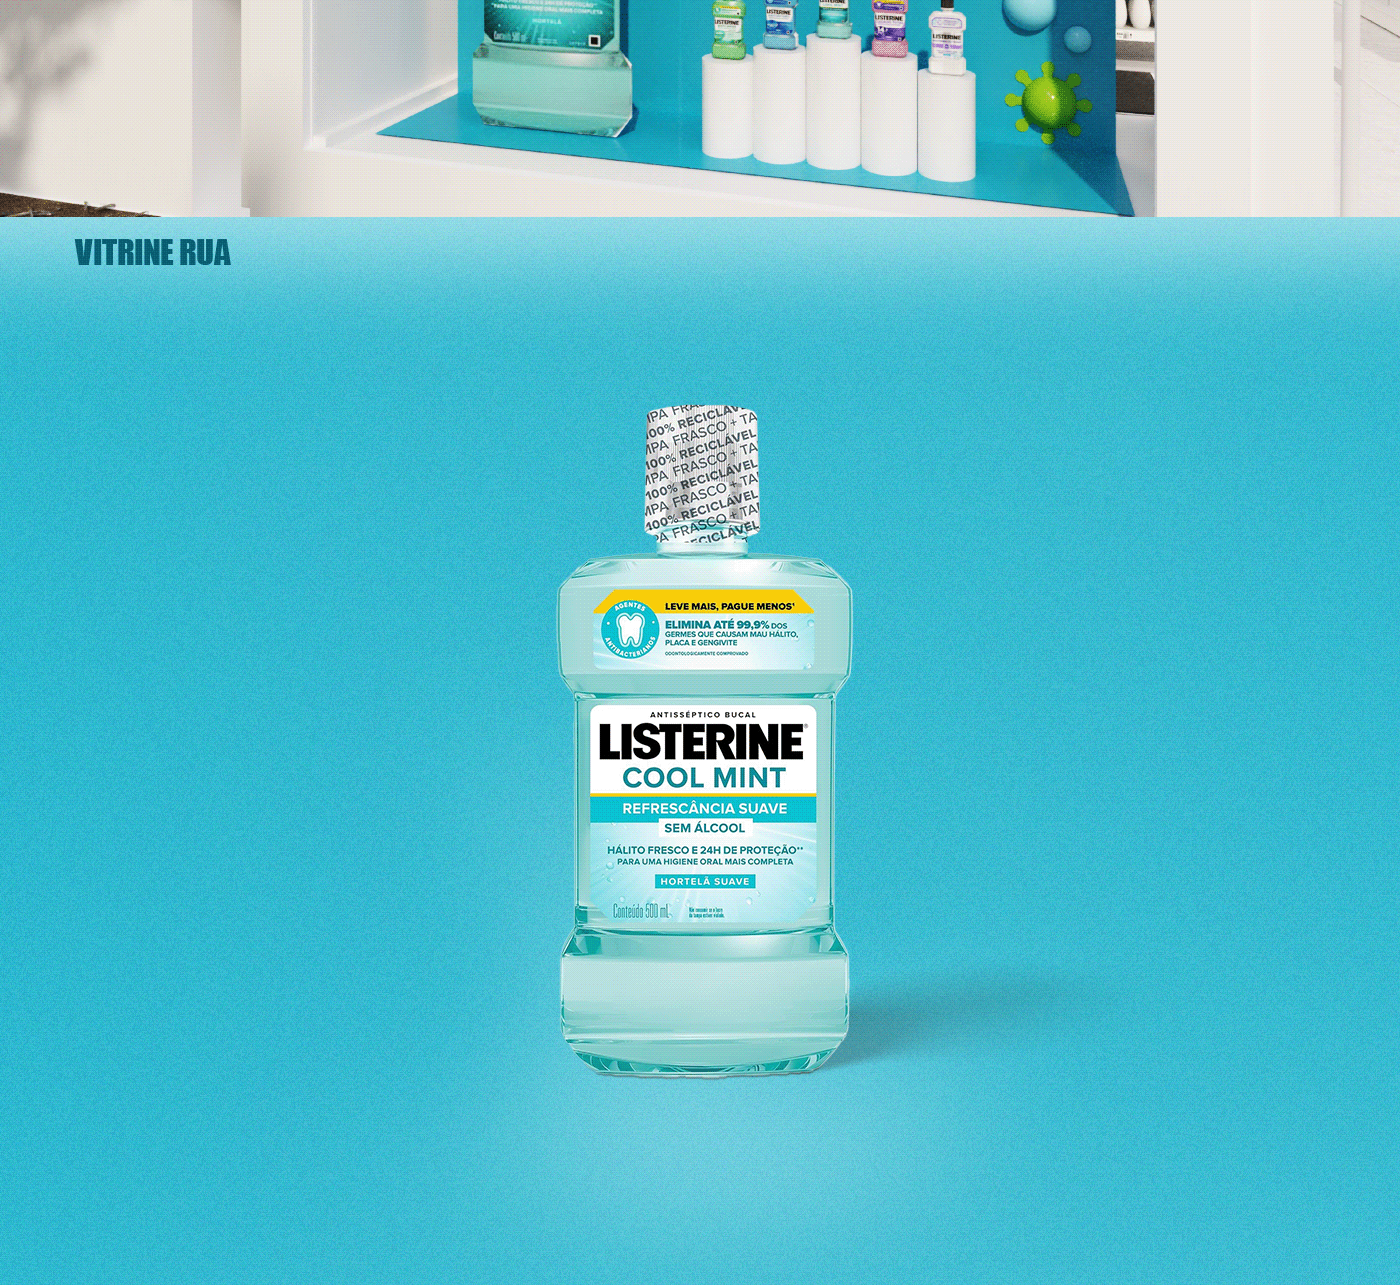 listerine Mouthwash clean campaing promo oral health Routine everyday